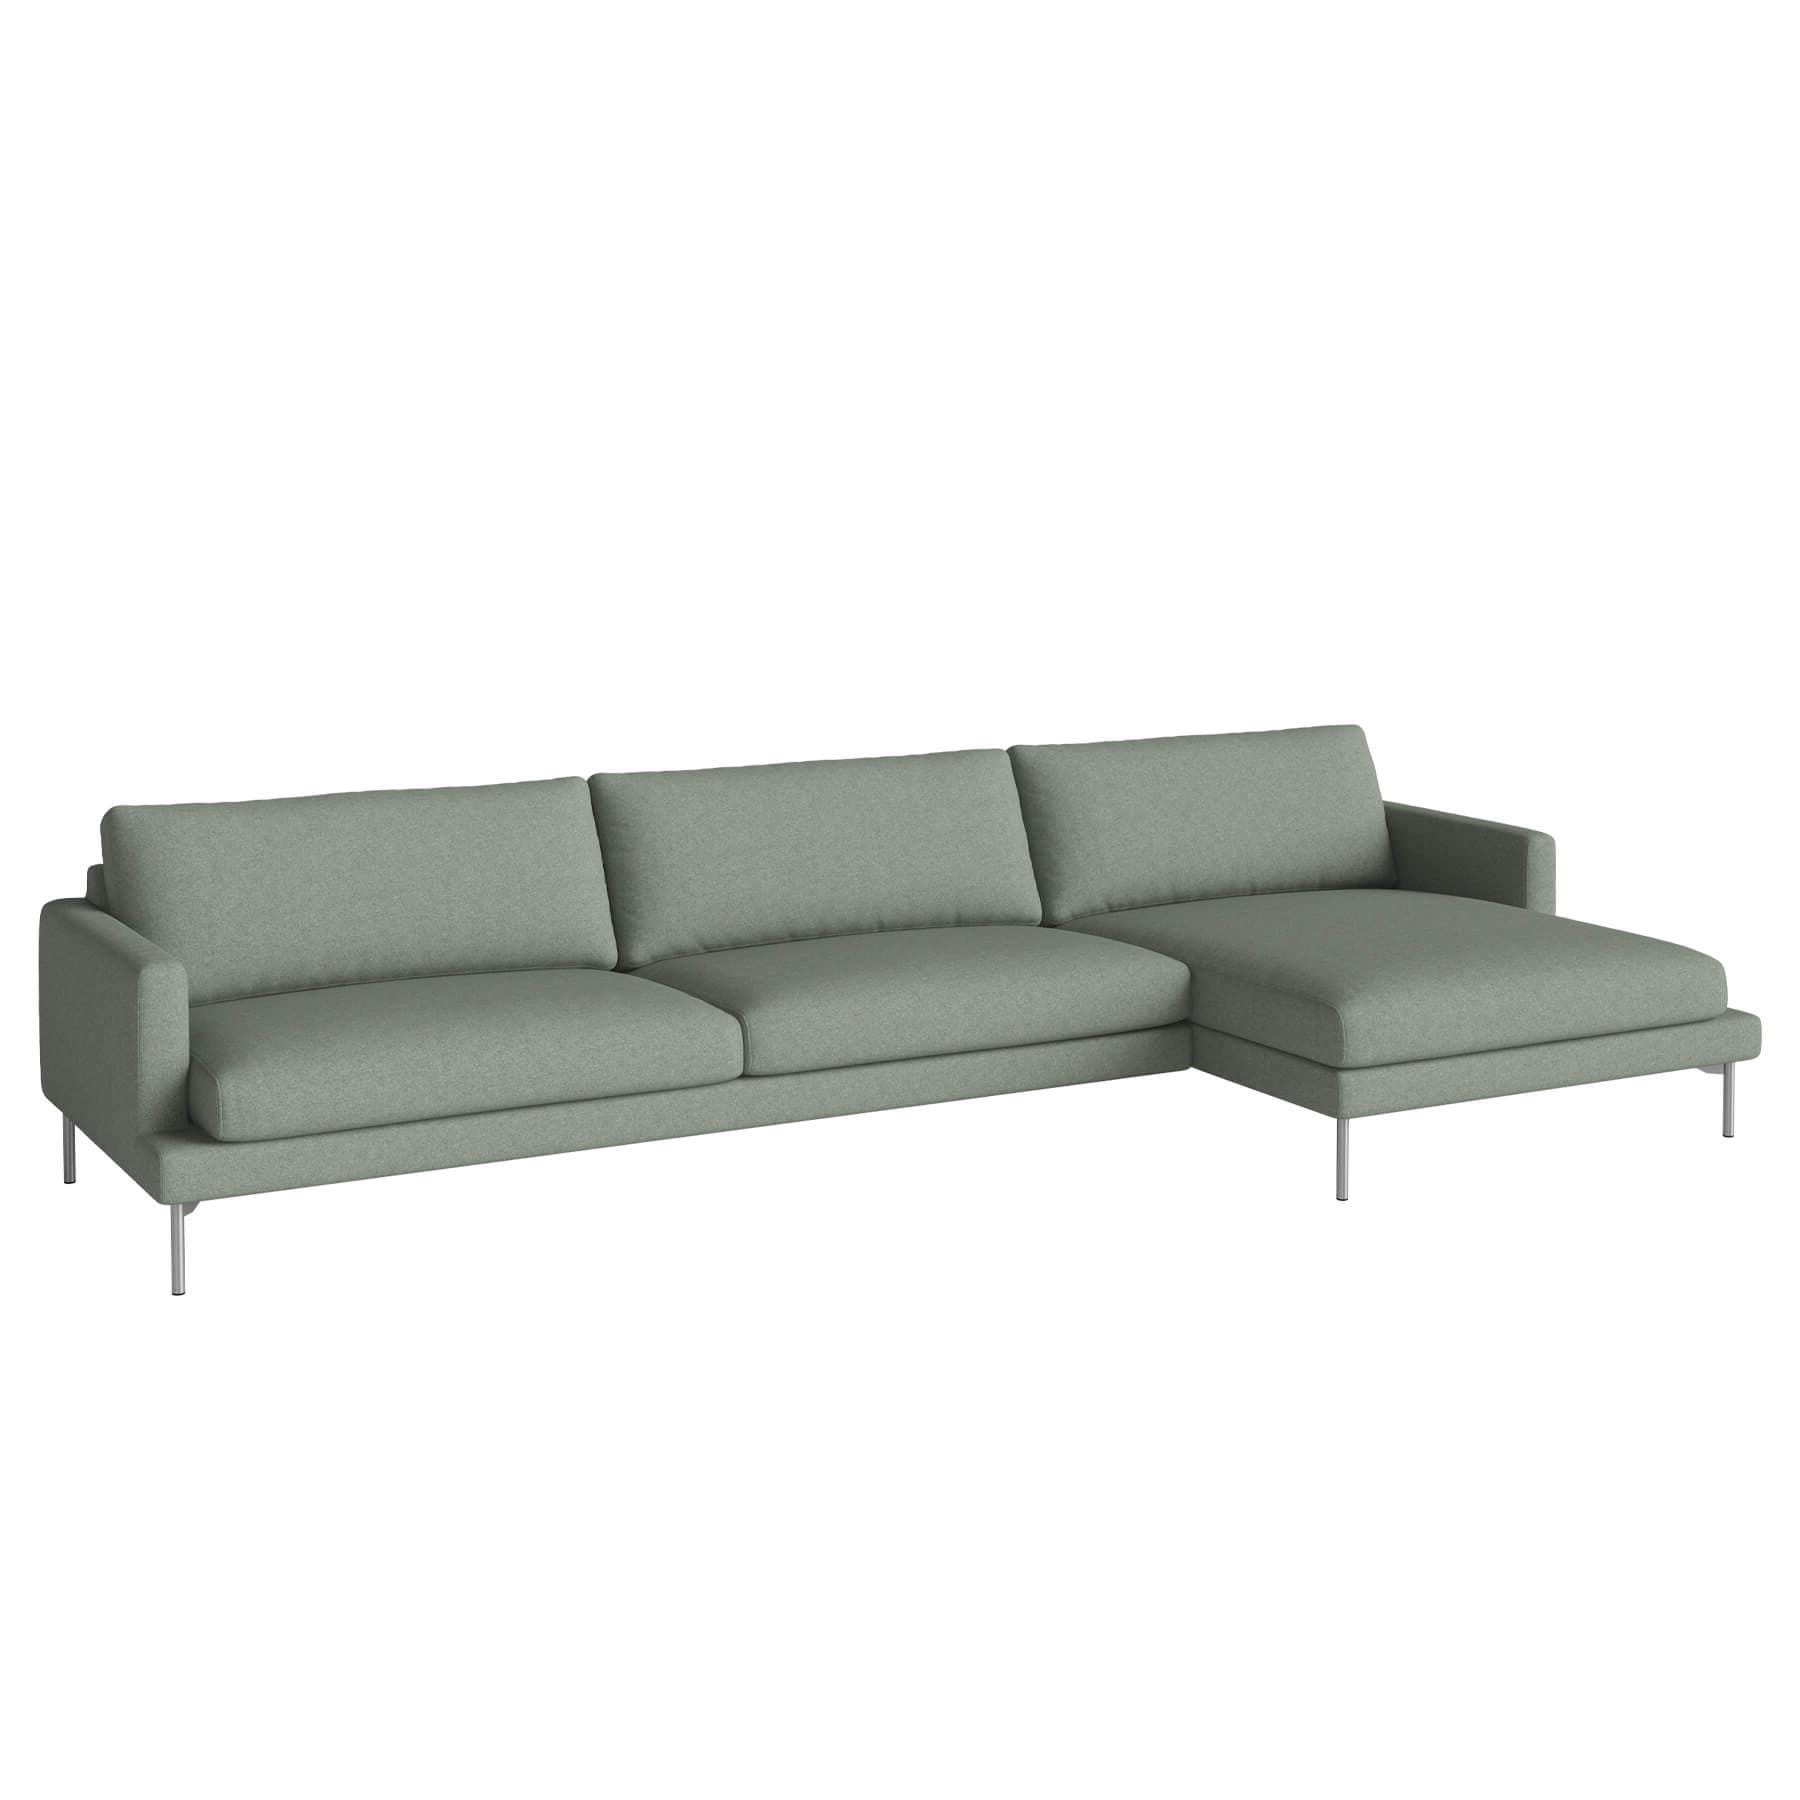 Bolia Veneda Sofa 45 Seater Sofa With Chaise Longue Brushed Steel Qual Green Right Green Designer Furniture From Holloways Of Ludlow